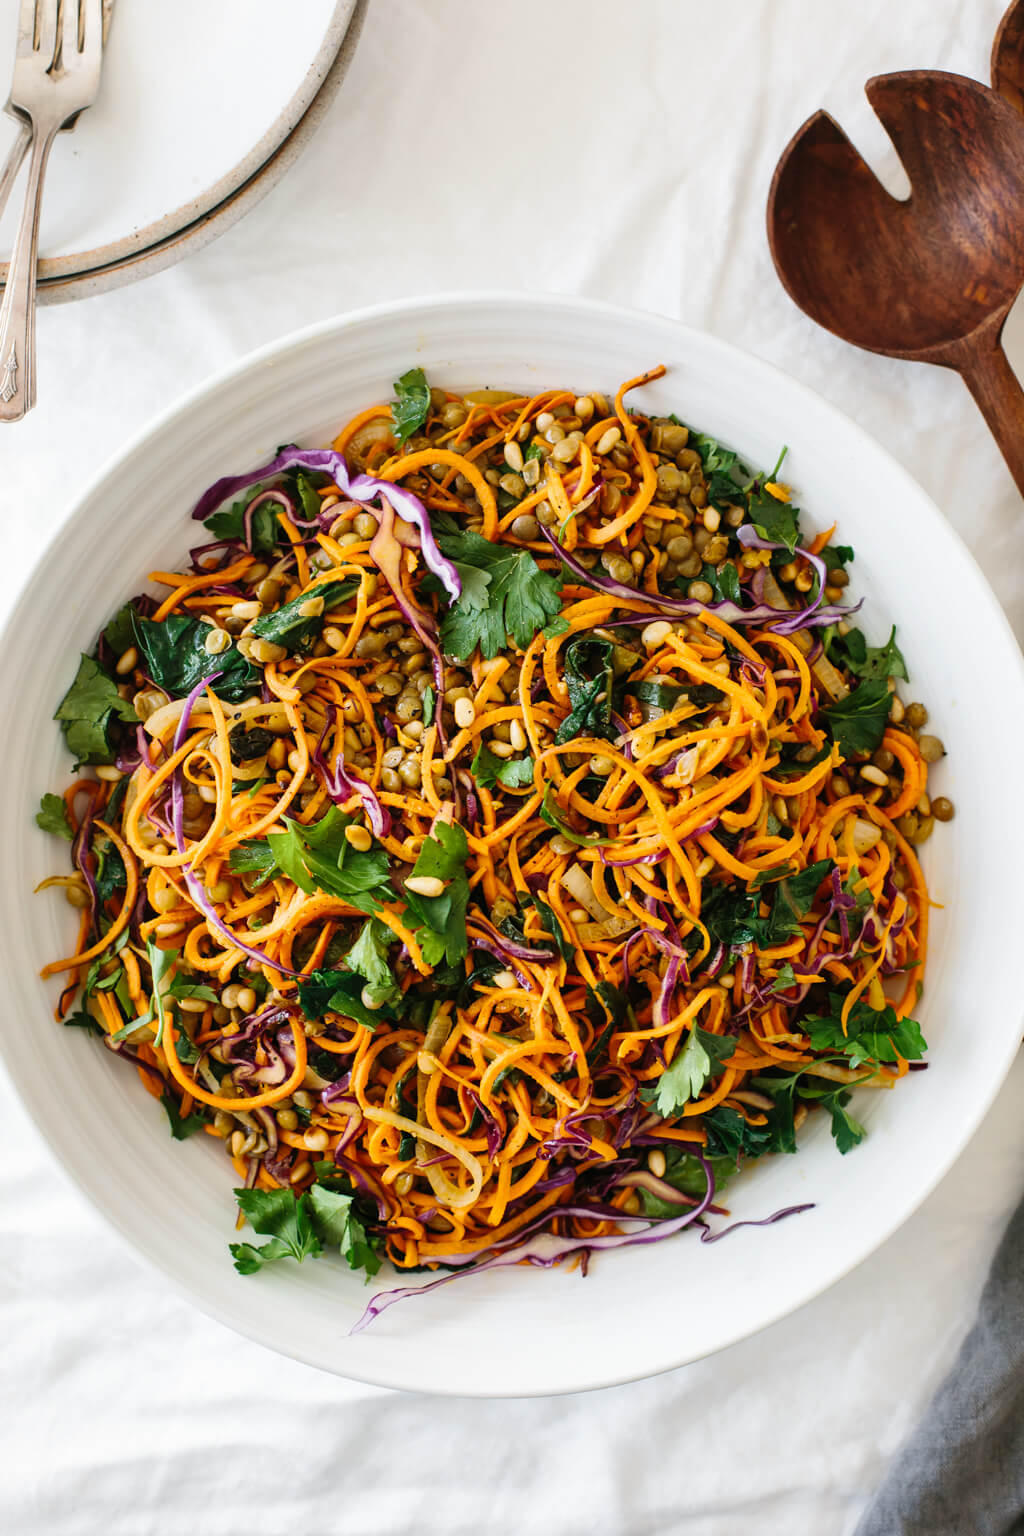 Sweet potato noodles salad is a combination of spiralized sweet potato noodles, cabbage, lentils, sautéed onions and Swiss chard. It's topped off with fresh herbs, toasted pine nuts and a zesty Dijon vinaigrette.